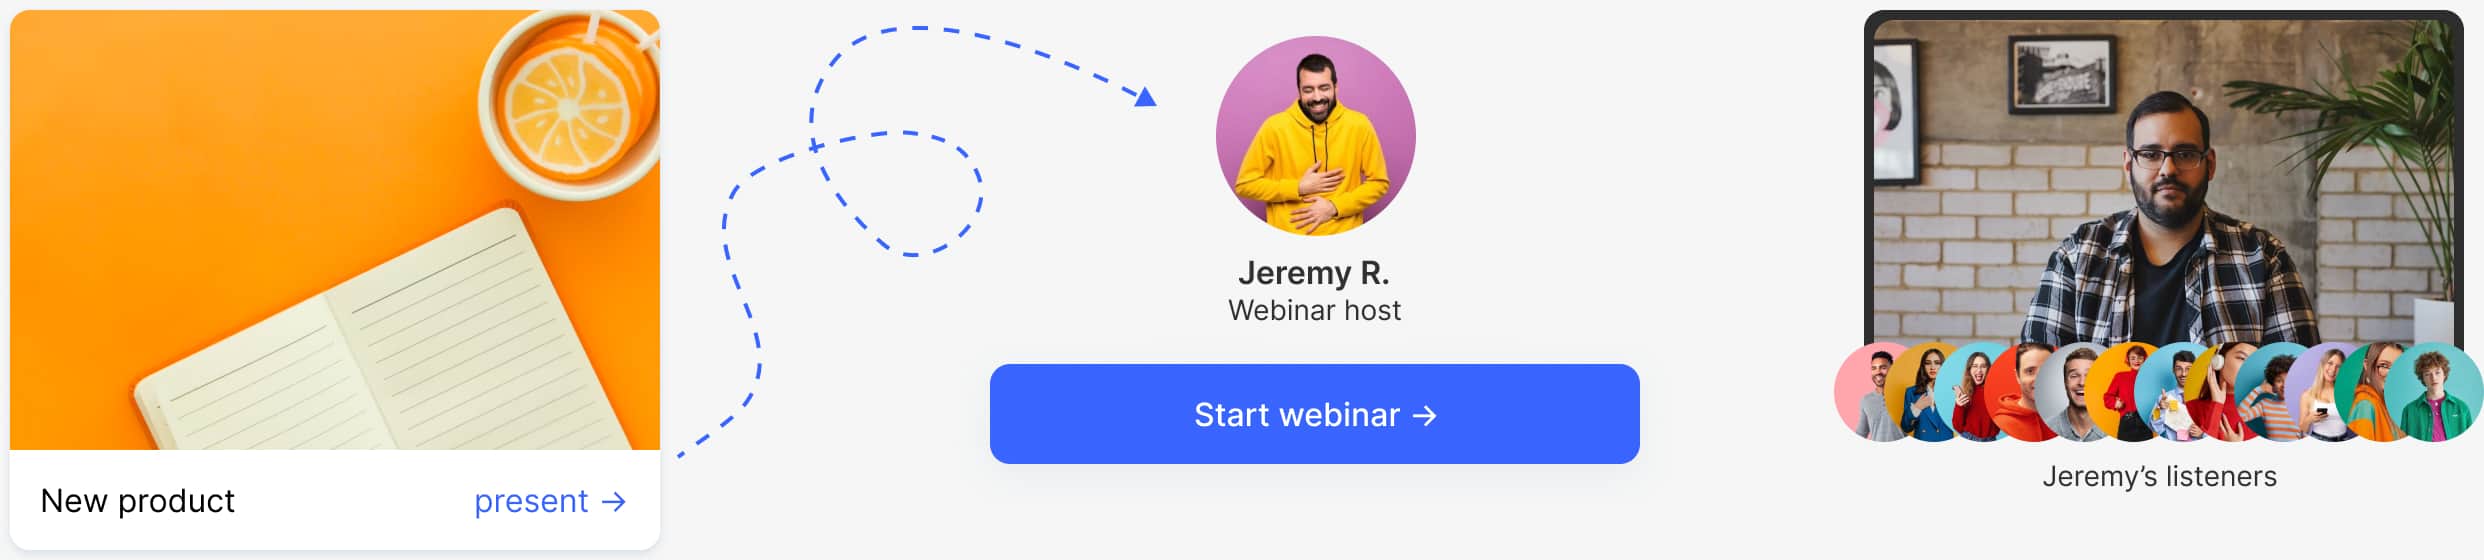 How is a webinar different from an online conference